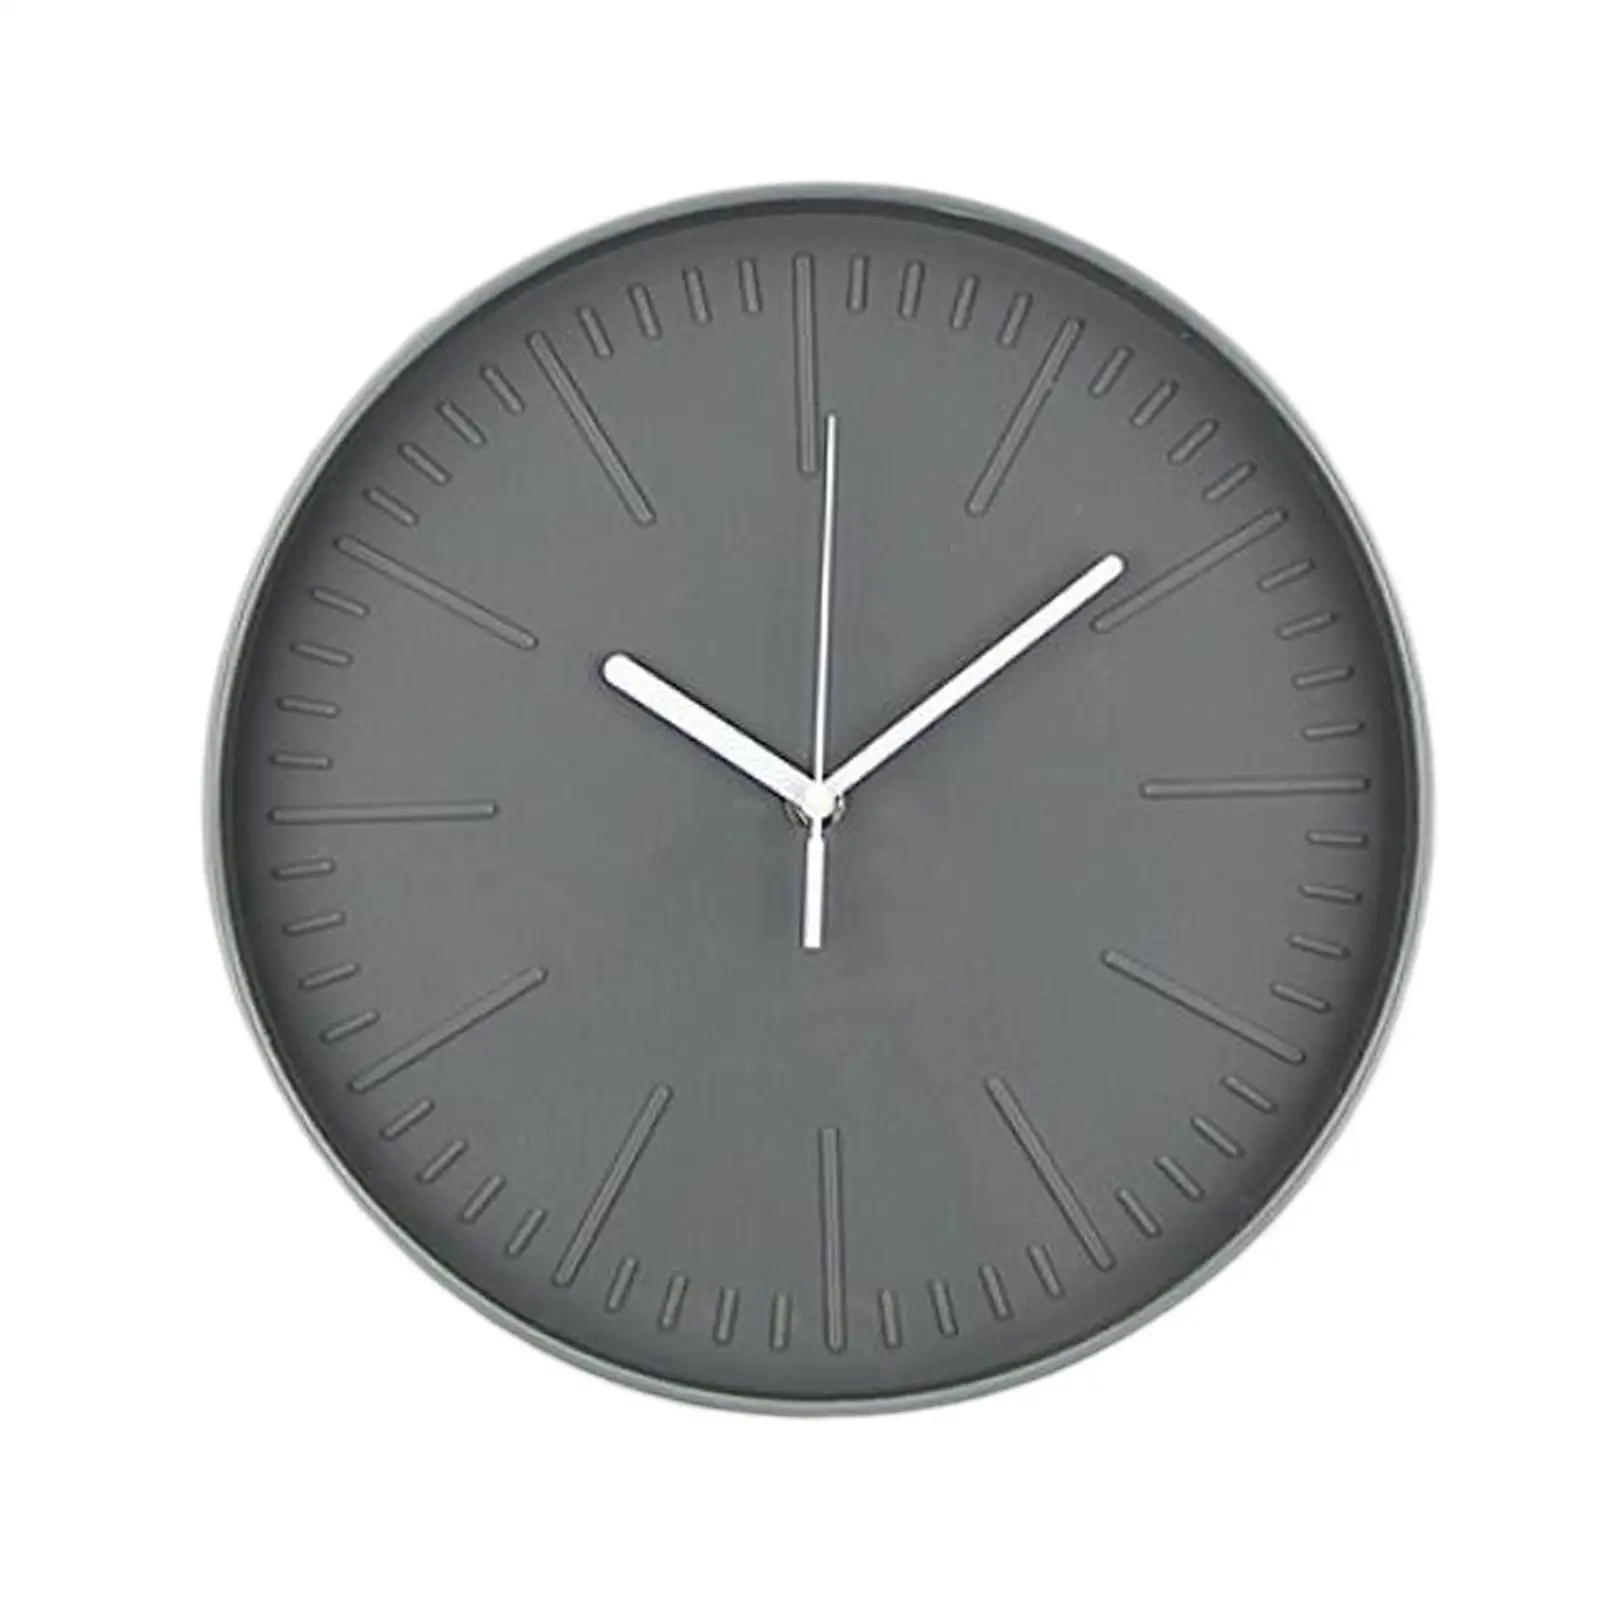 Round Hanging Clocks Silent Decors Decorative Watches 12inch Wall Clock for Kitchen Living Room Bedroom Kids Room Home